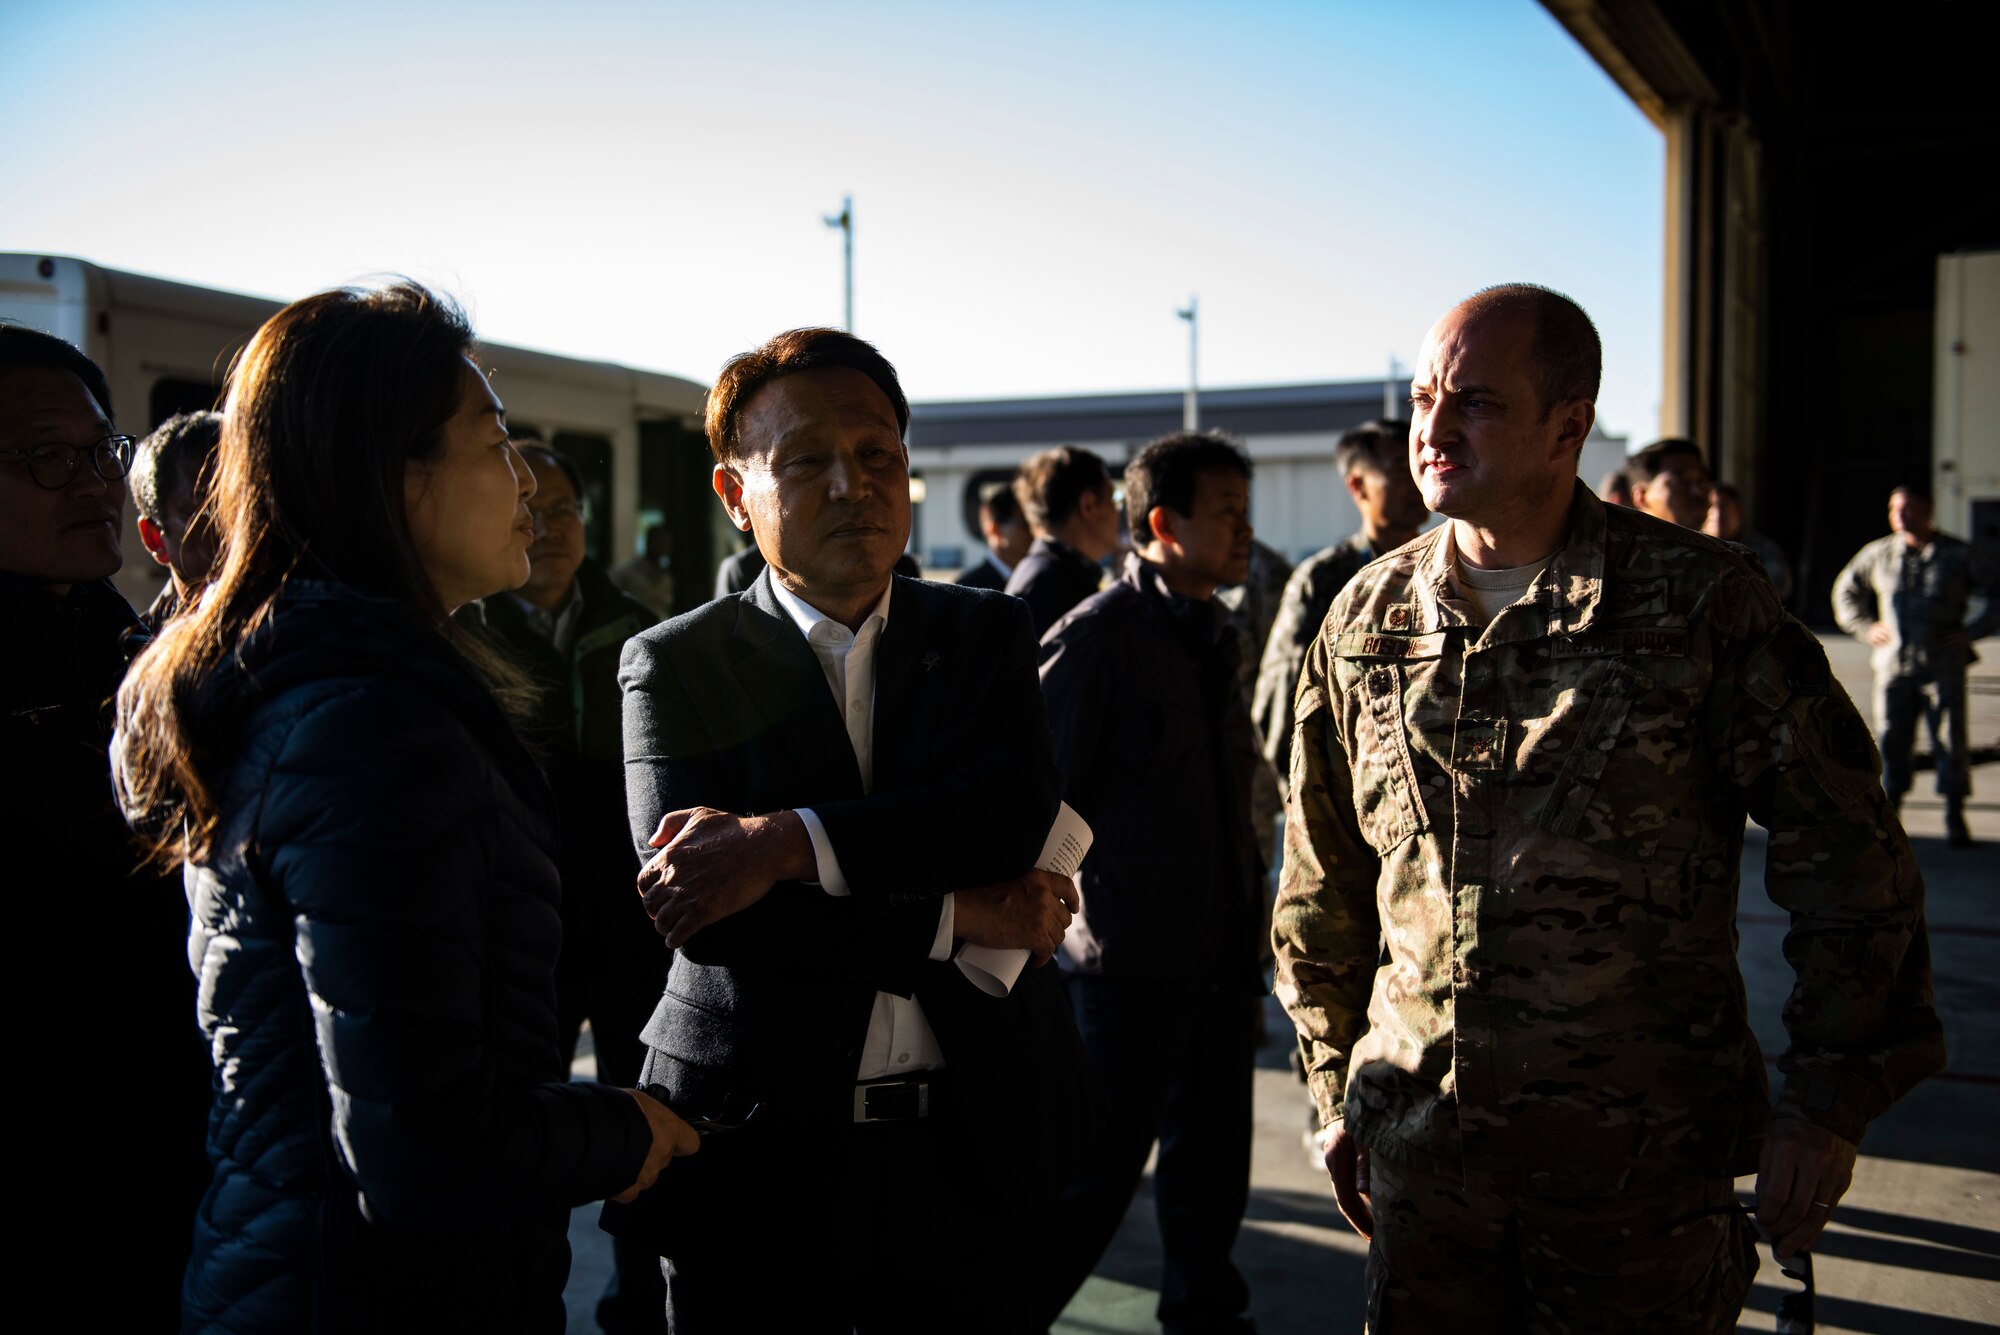 Col. John Bosone, 8th Fighter Wing commander (right), gives a tour to Kang Imjune, Mayor of Gunsan (middle), at Kunsan Air Base, Republic of Korea, Oct. 19, 2018. Mayor Imjune had a chance to see first-hand the capabilities and partnership the 8th FW brings to the Korean Peninsula with the help of Republic of Korea Air Force partners.  (U.S. Air Force photo by Senior Airman Stefan Alvarez)